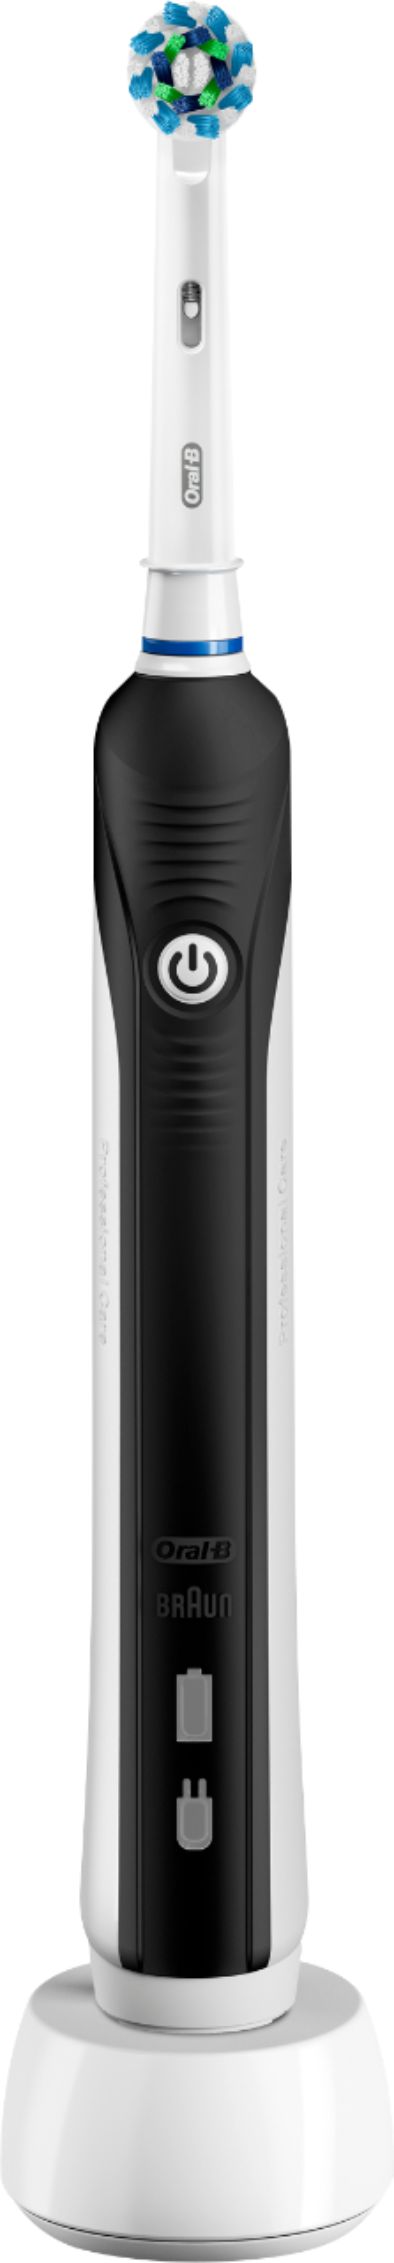 Angle View: Oral-B - Pro 1000 Electric Toothbrush - Black